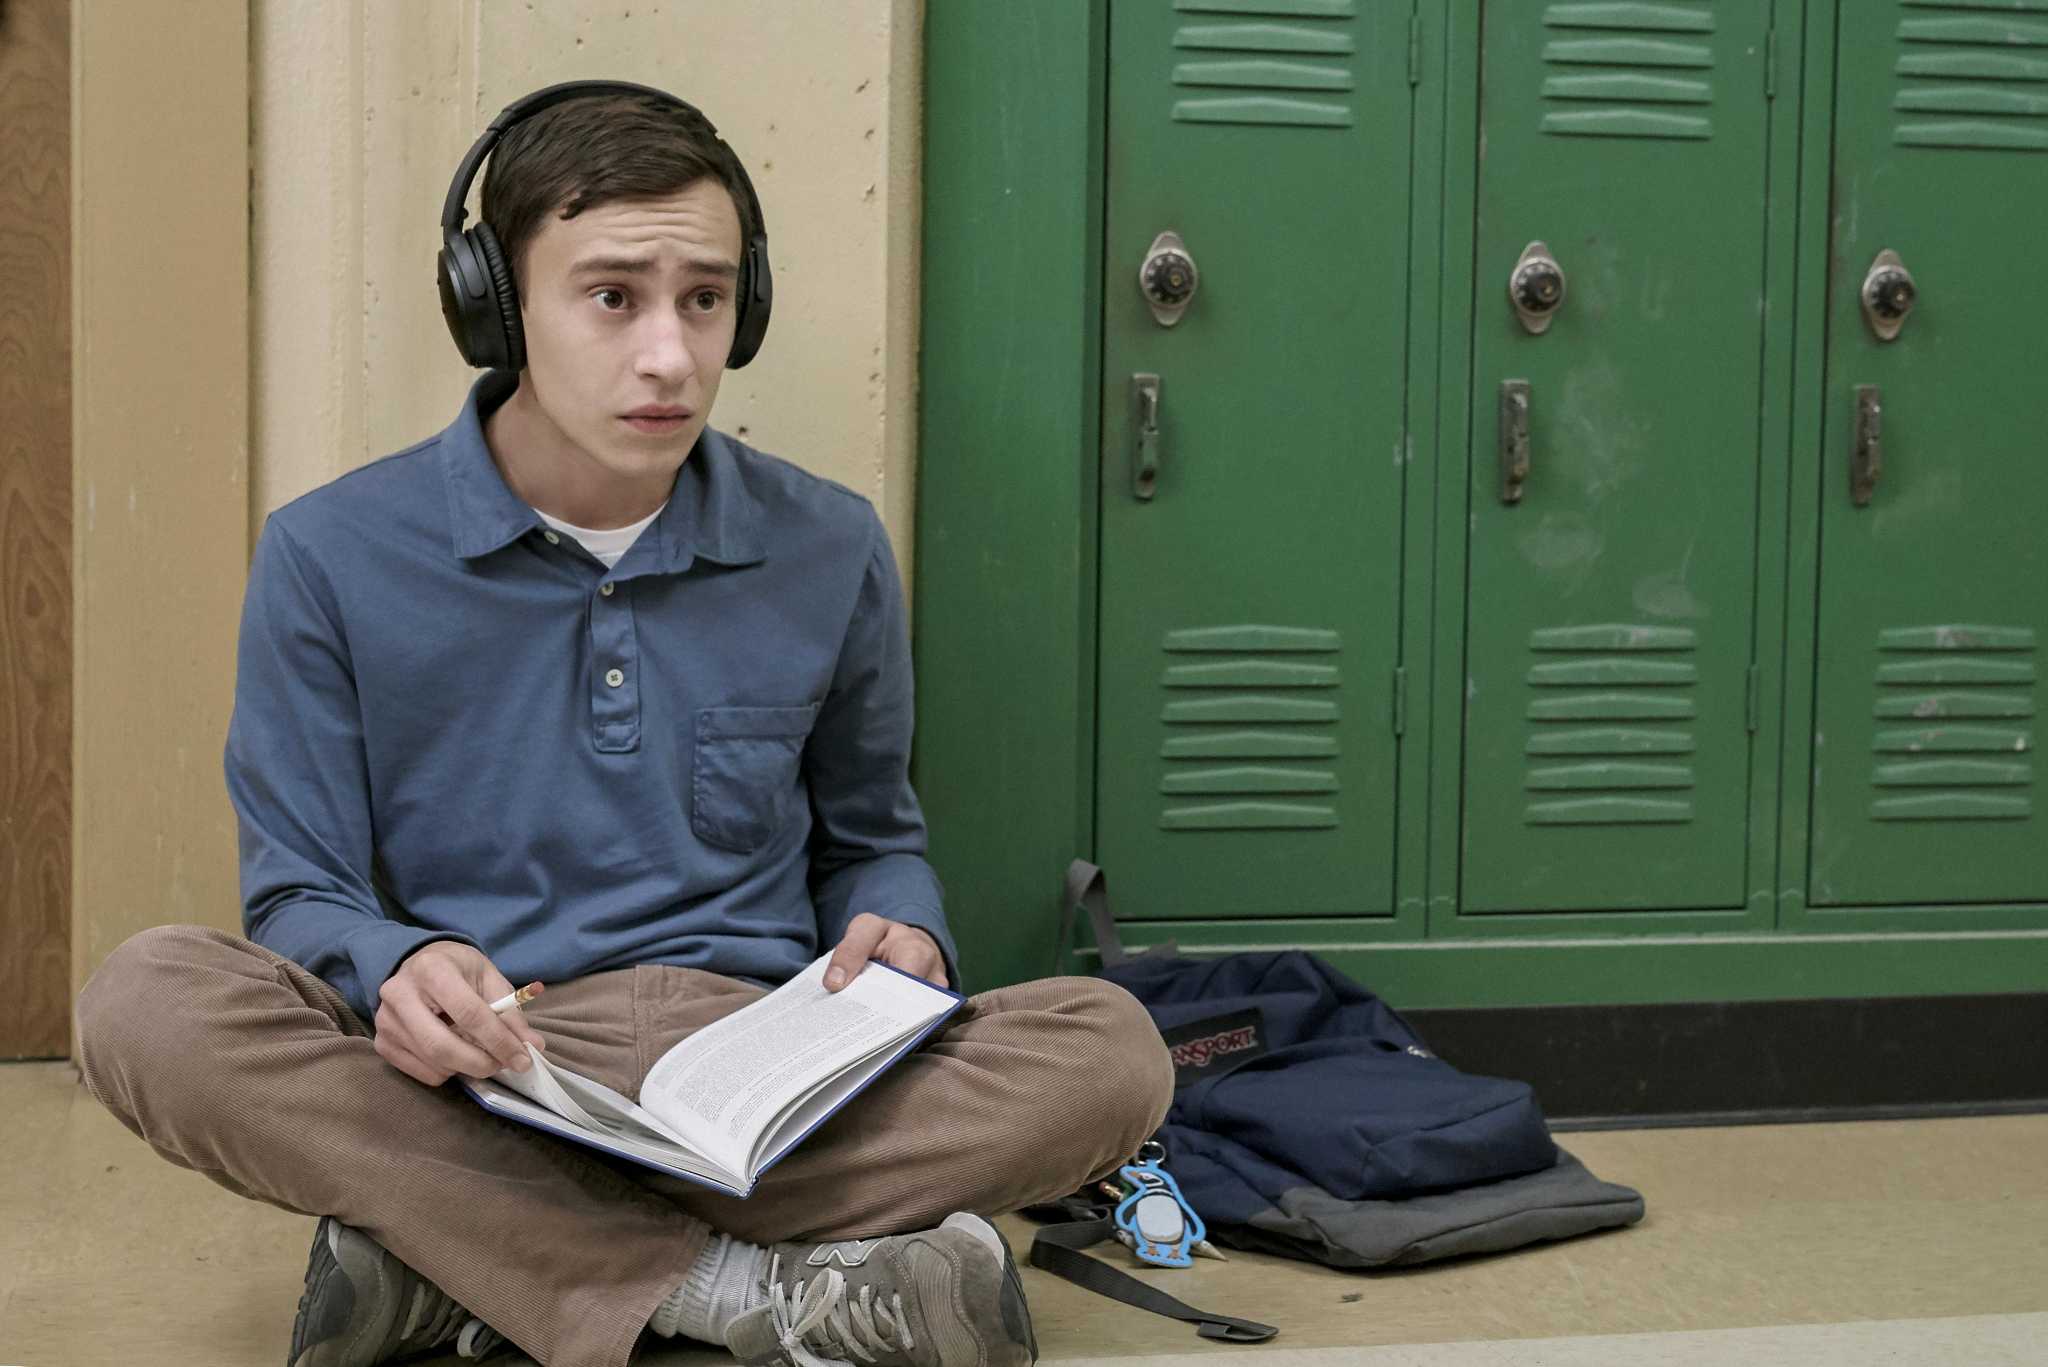 Atypical Season 4 Review- A Steady Final Rollercoaster Ride With A Message Of Hope